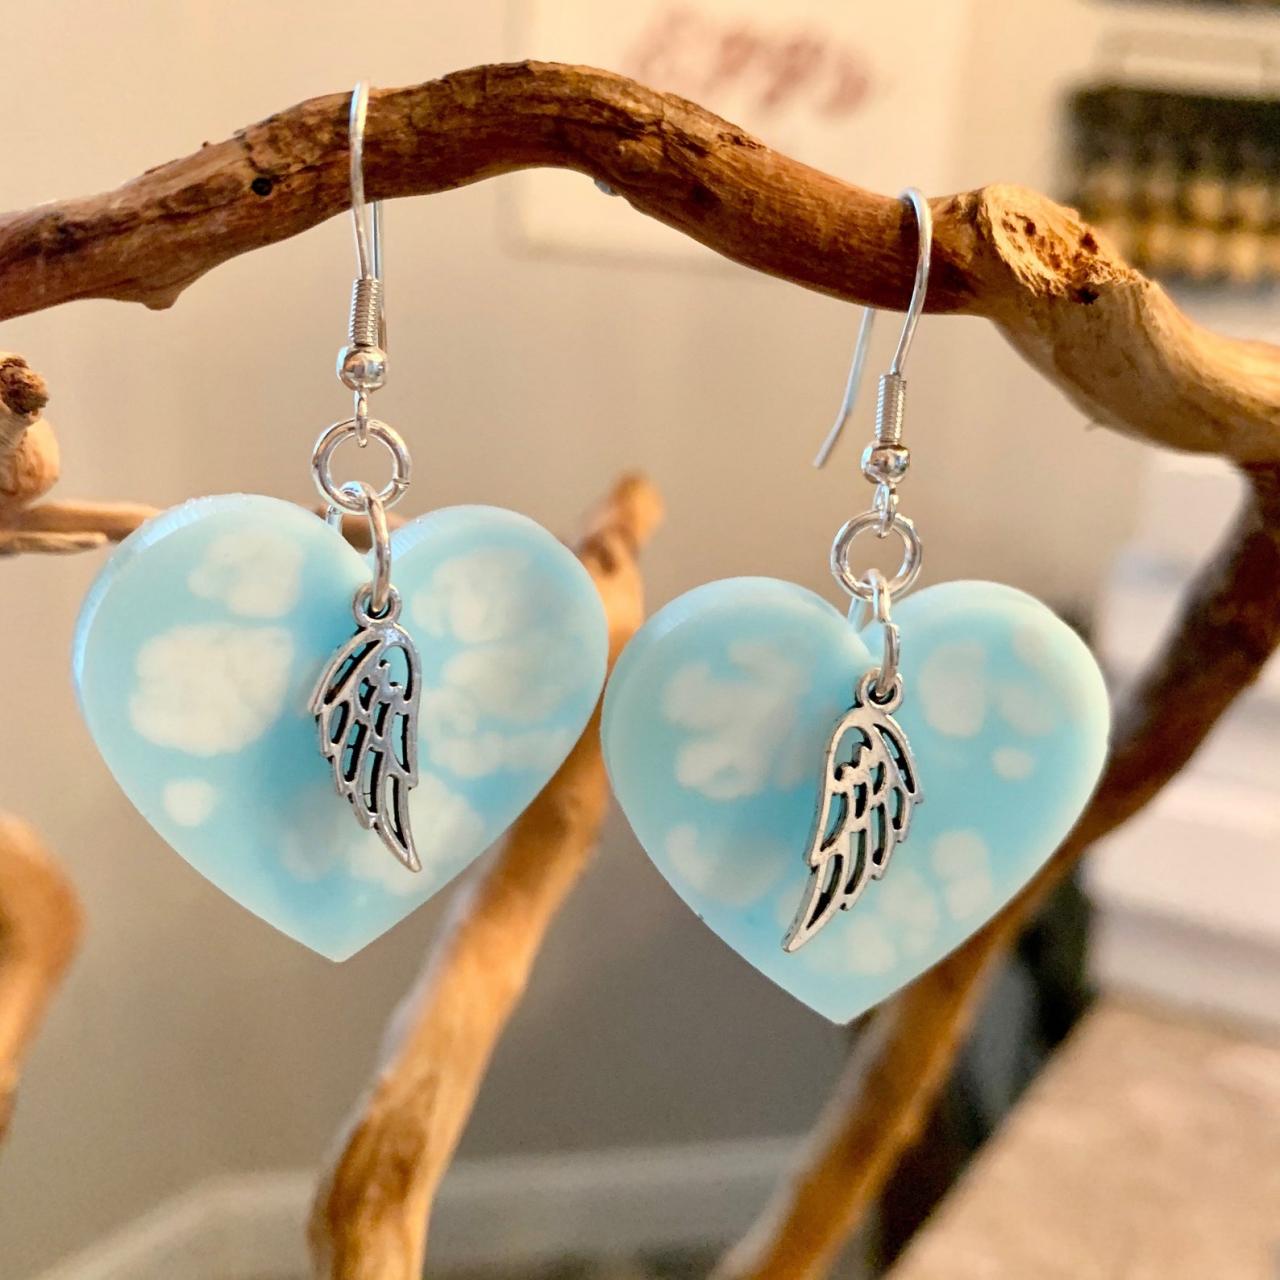 Heart/angel Earrings,clouds,resin Art,angel Wing Charm,angelic, Jewelry For Women,spiritual,heaven Earrings, Jewelry For A Special Occasion